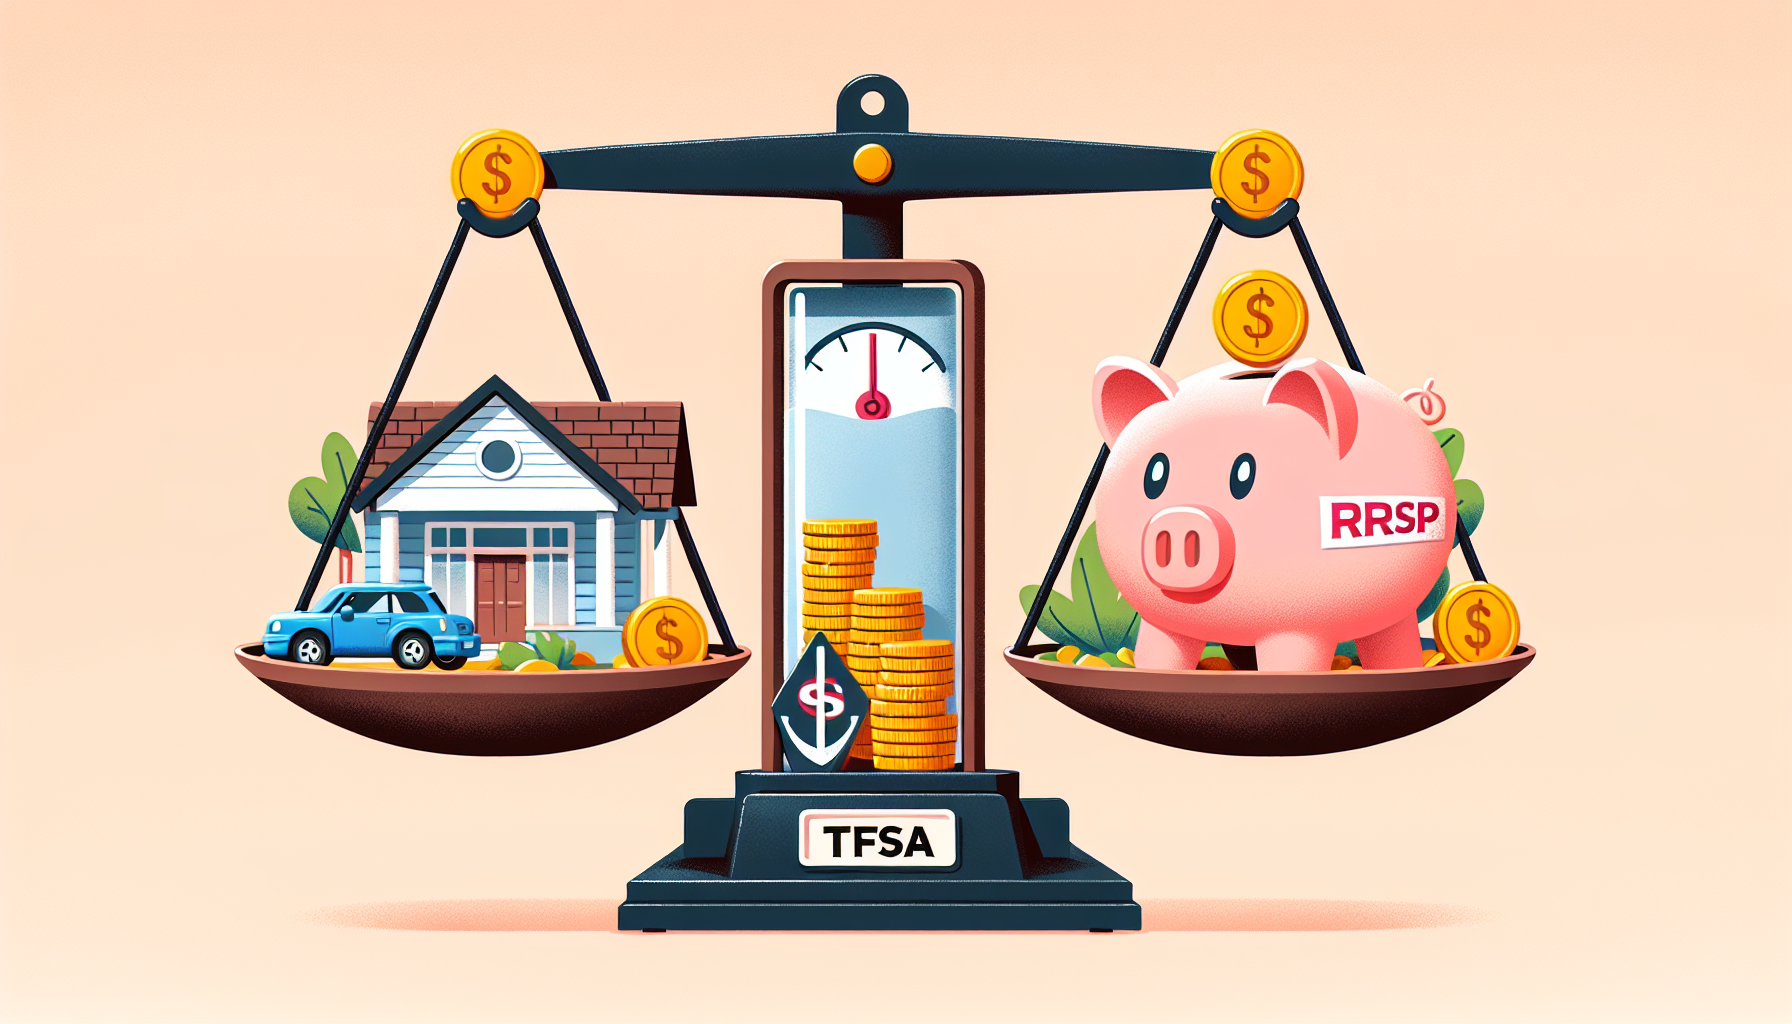 Comparison between RRSP and Tax-Free Savings Accounts (TFSAs)